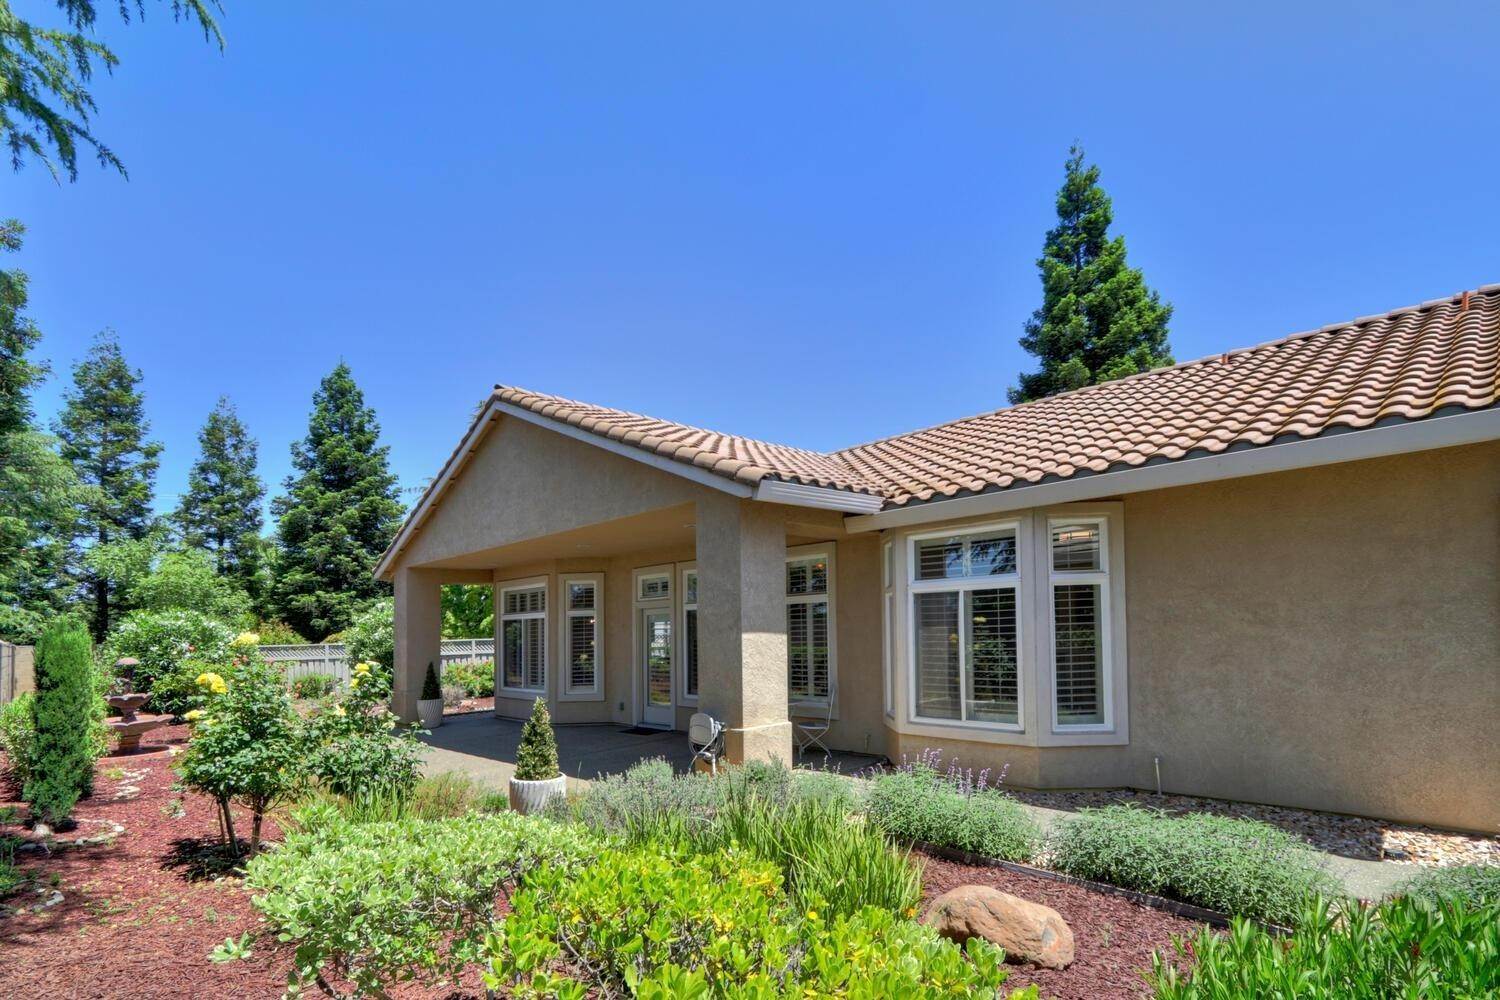 49. Single Family Homes for Active at 7437 Apple Hollow Loop Roseville, California 95747 United States